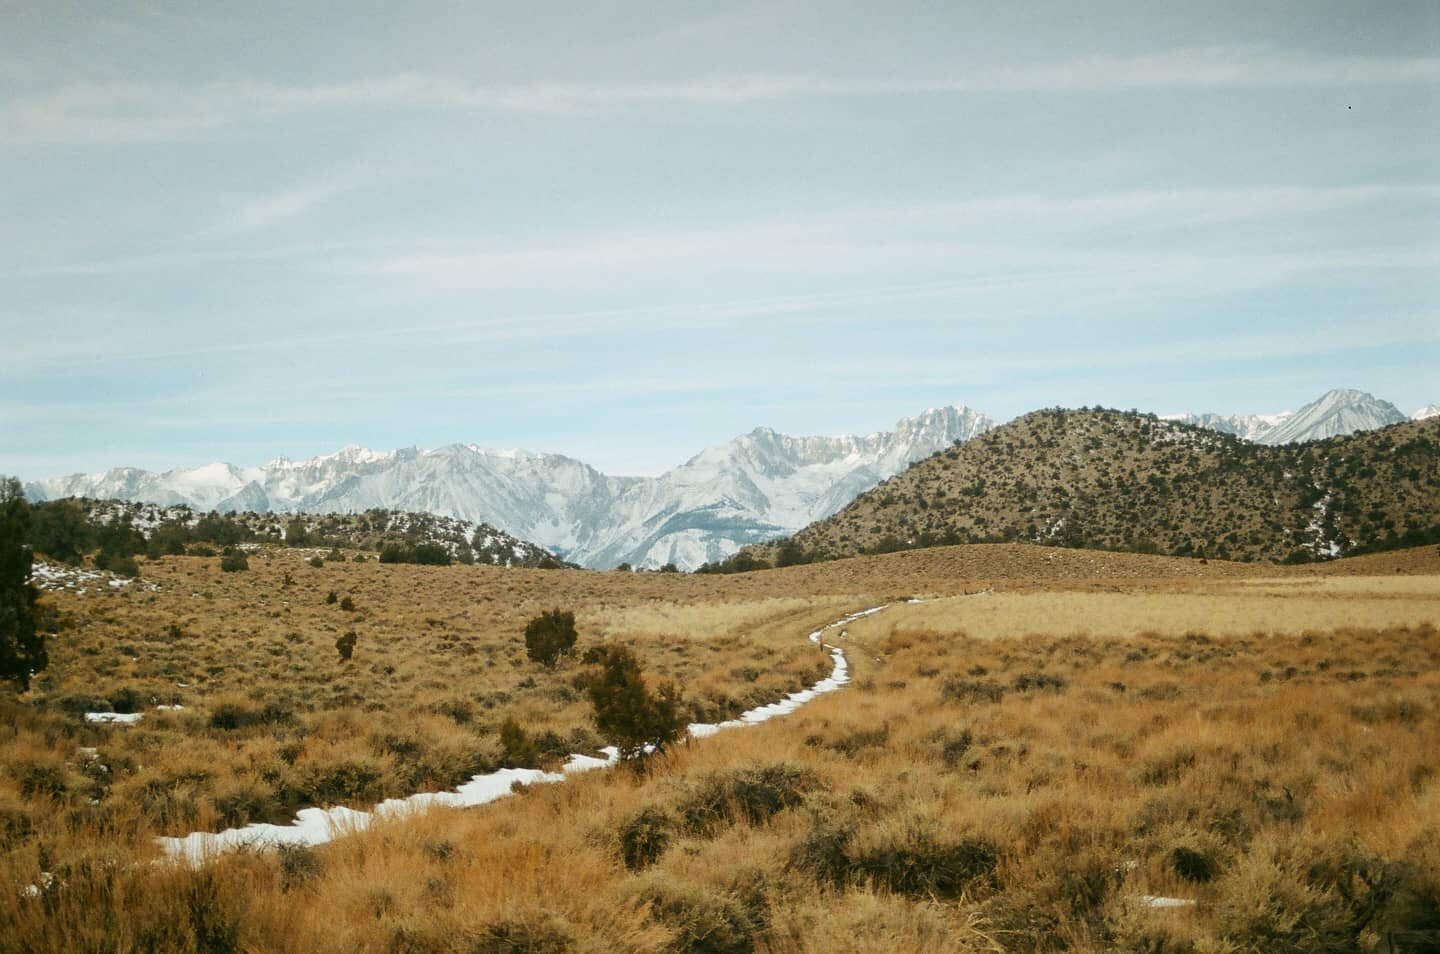 I'm really in love with the Inyo Mountains and seeing eye to eye with the Palisades.
👁️Kodak Porta 400 //Nikon N6006
.
.
.
#porta400 #nikonnofilter #vintagecameraphotography #easternsierra #highway395 #exploreinyocounty#palisades #inyomountains #iny